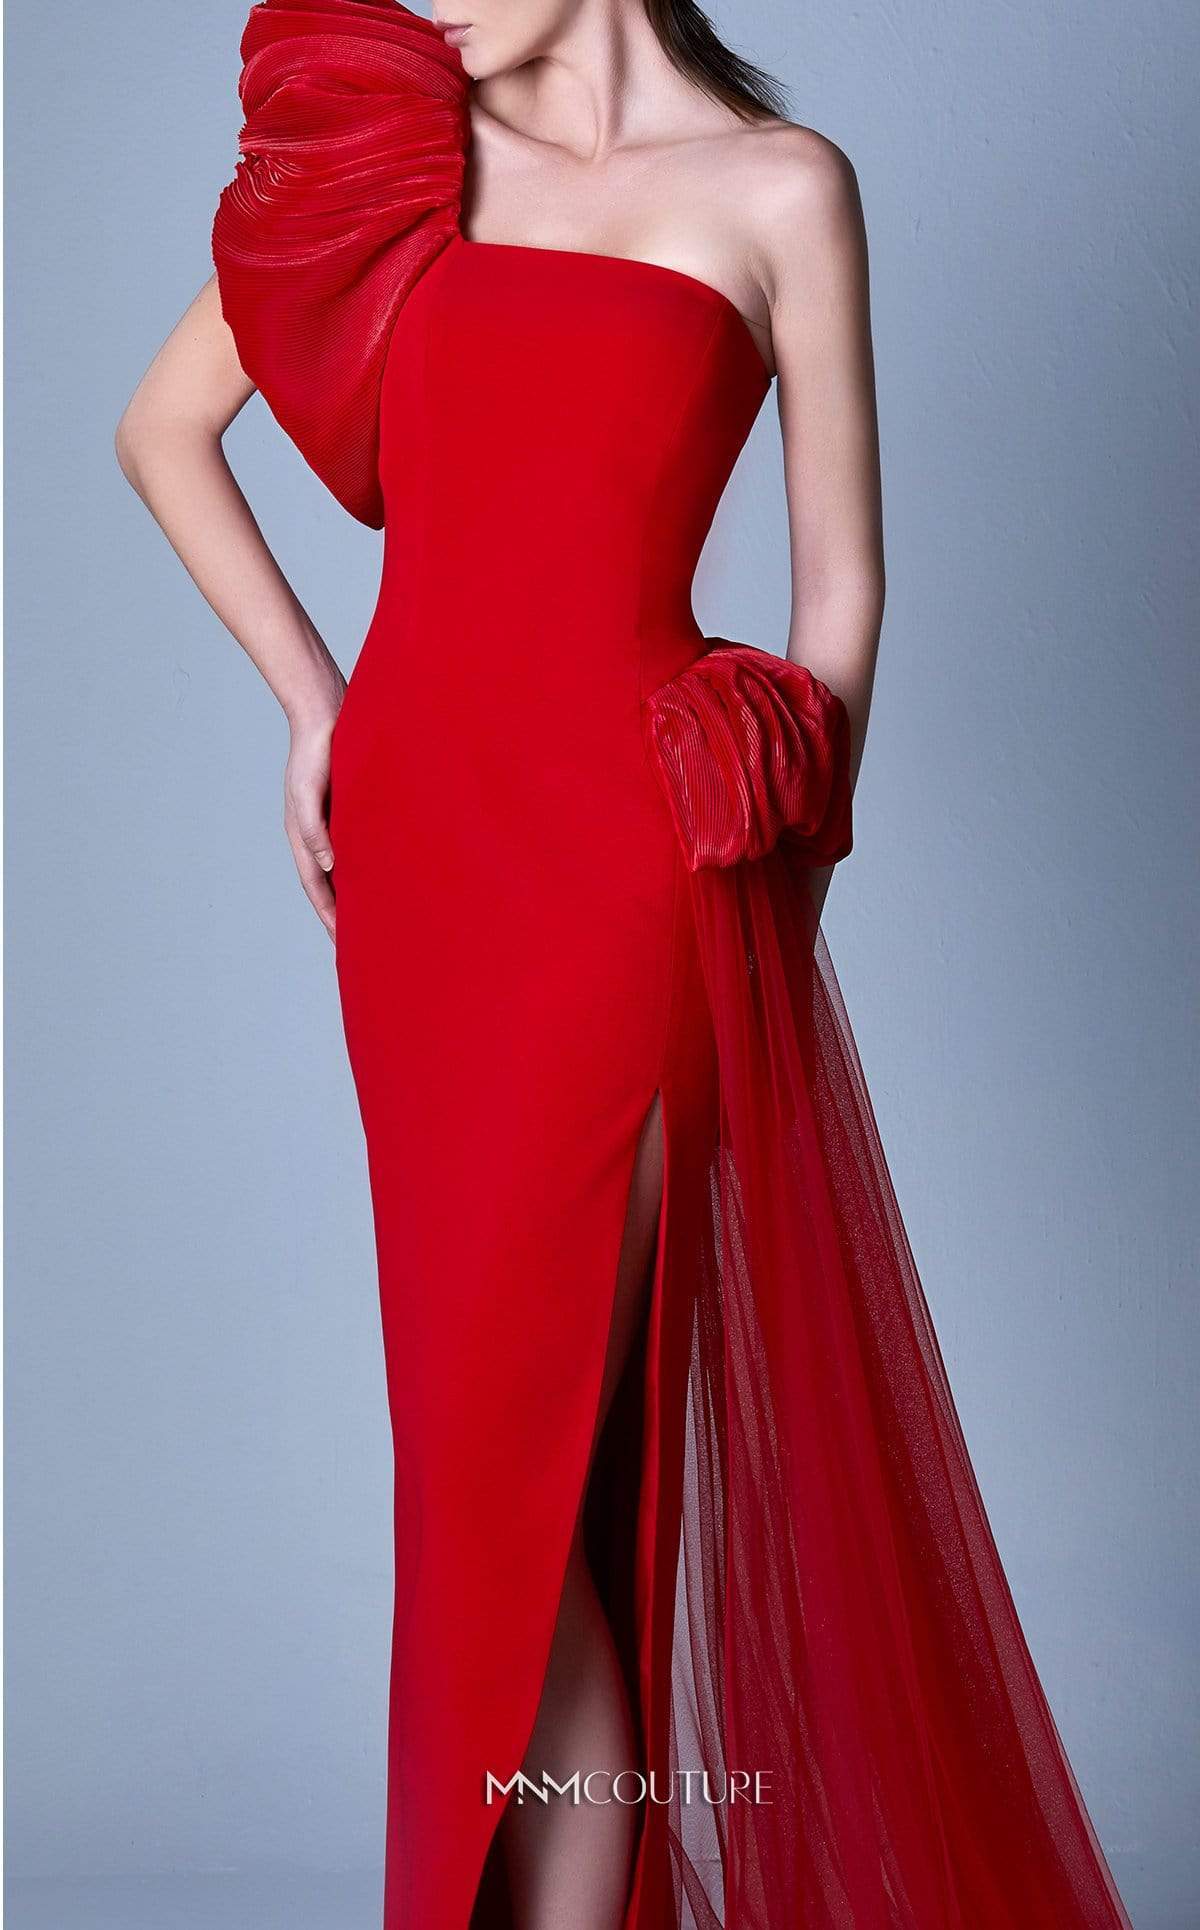 MNM COUTURE - G1096 Asymmetric Neck Fitted Dress With Draping In Red